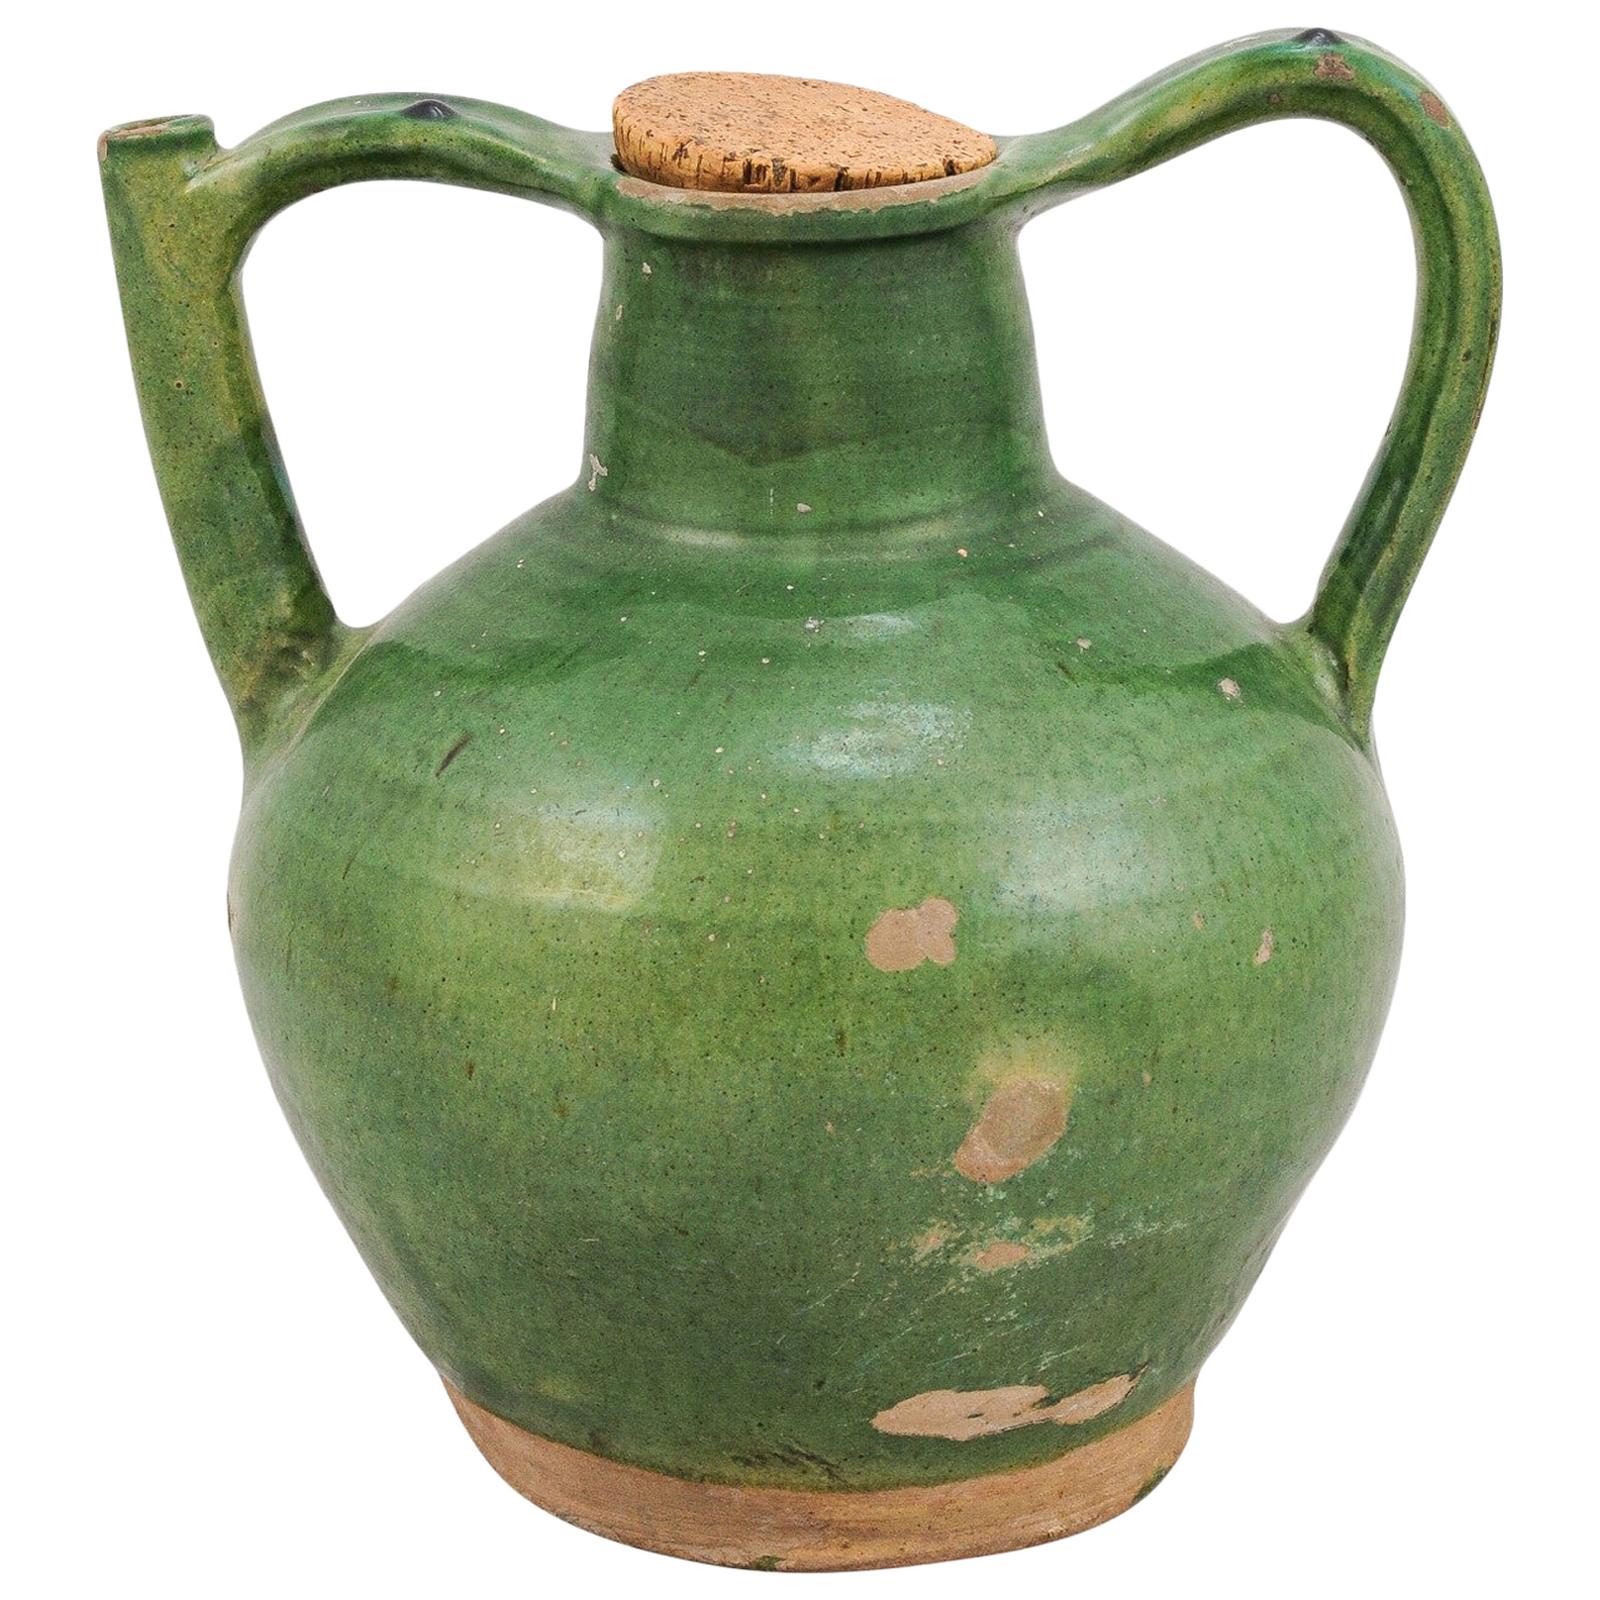 French Provincial 19th Century Green Glazed Pitcher with Cork Top